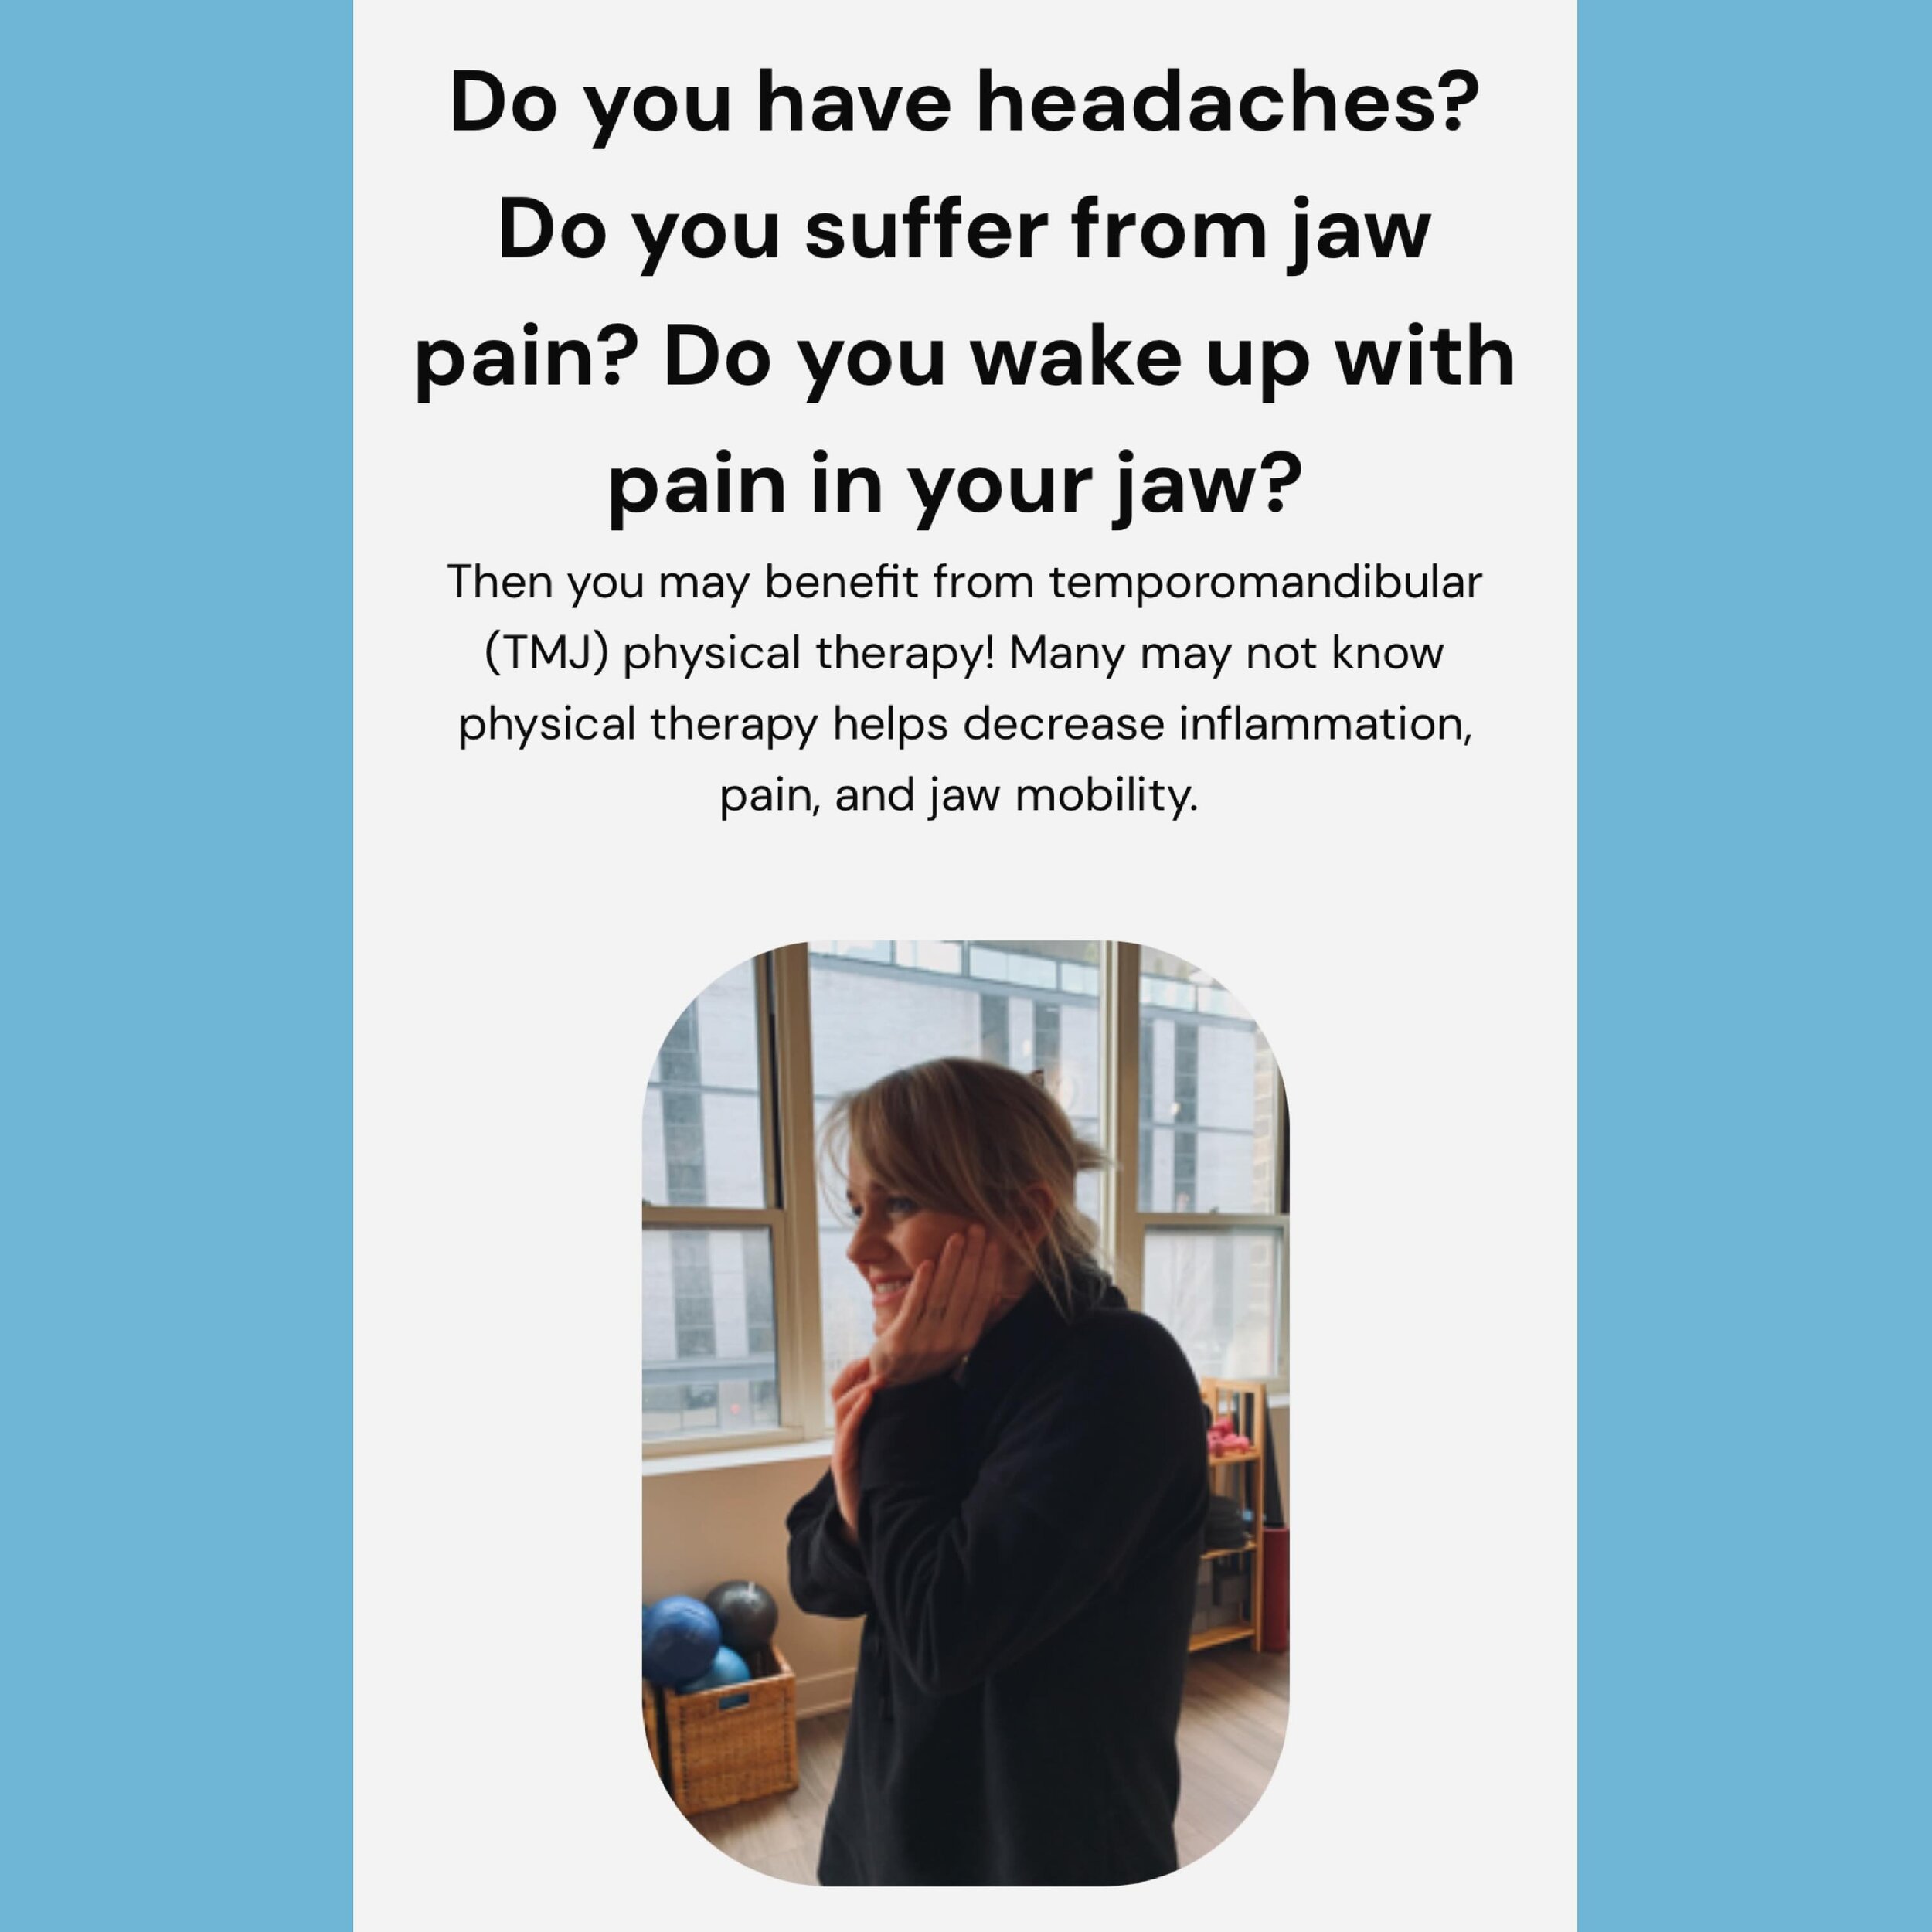 Come see us if you have jaw pain #tmj 

#physicaltherapy #pt #rivernorth #chicago